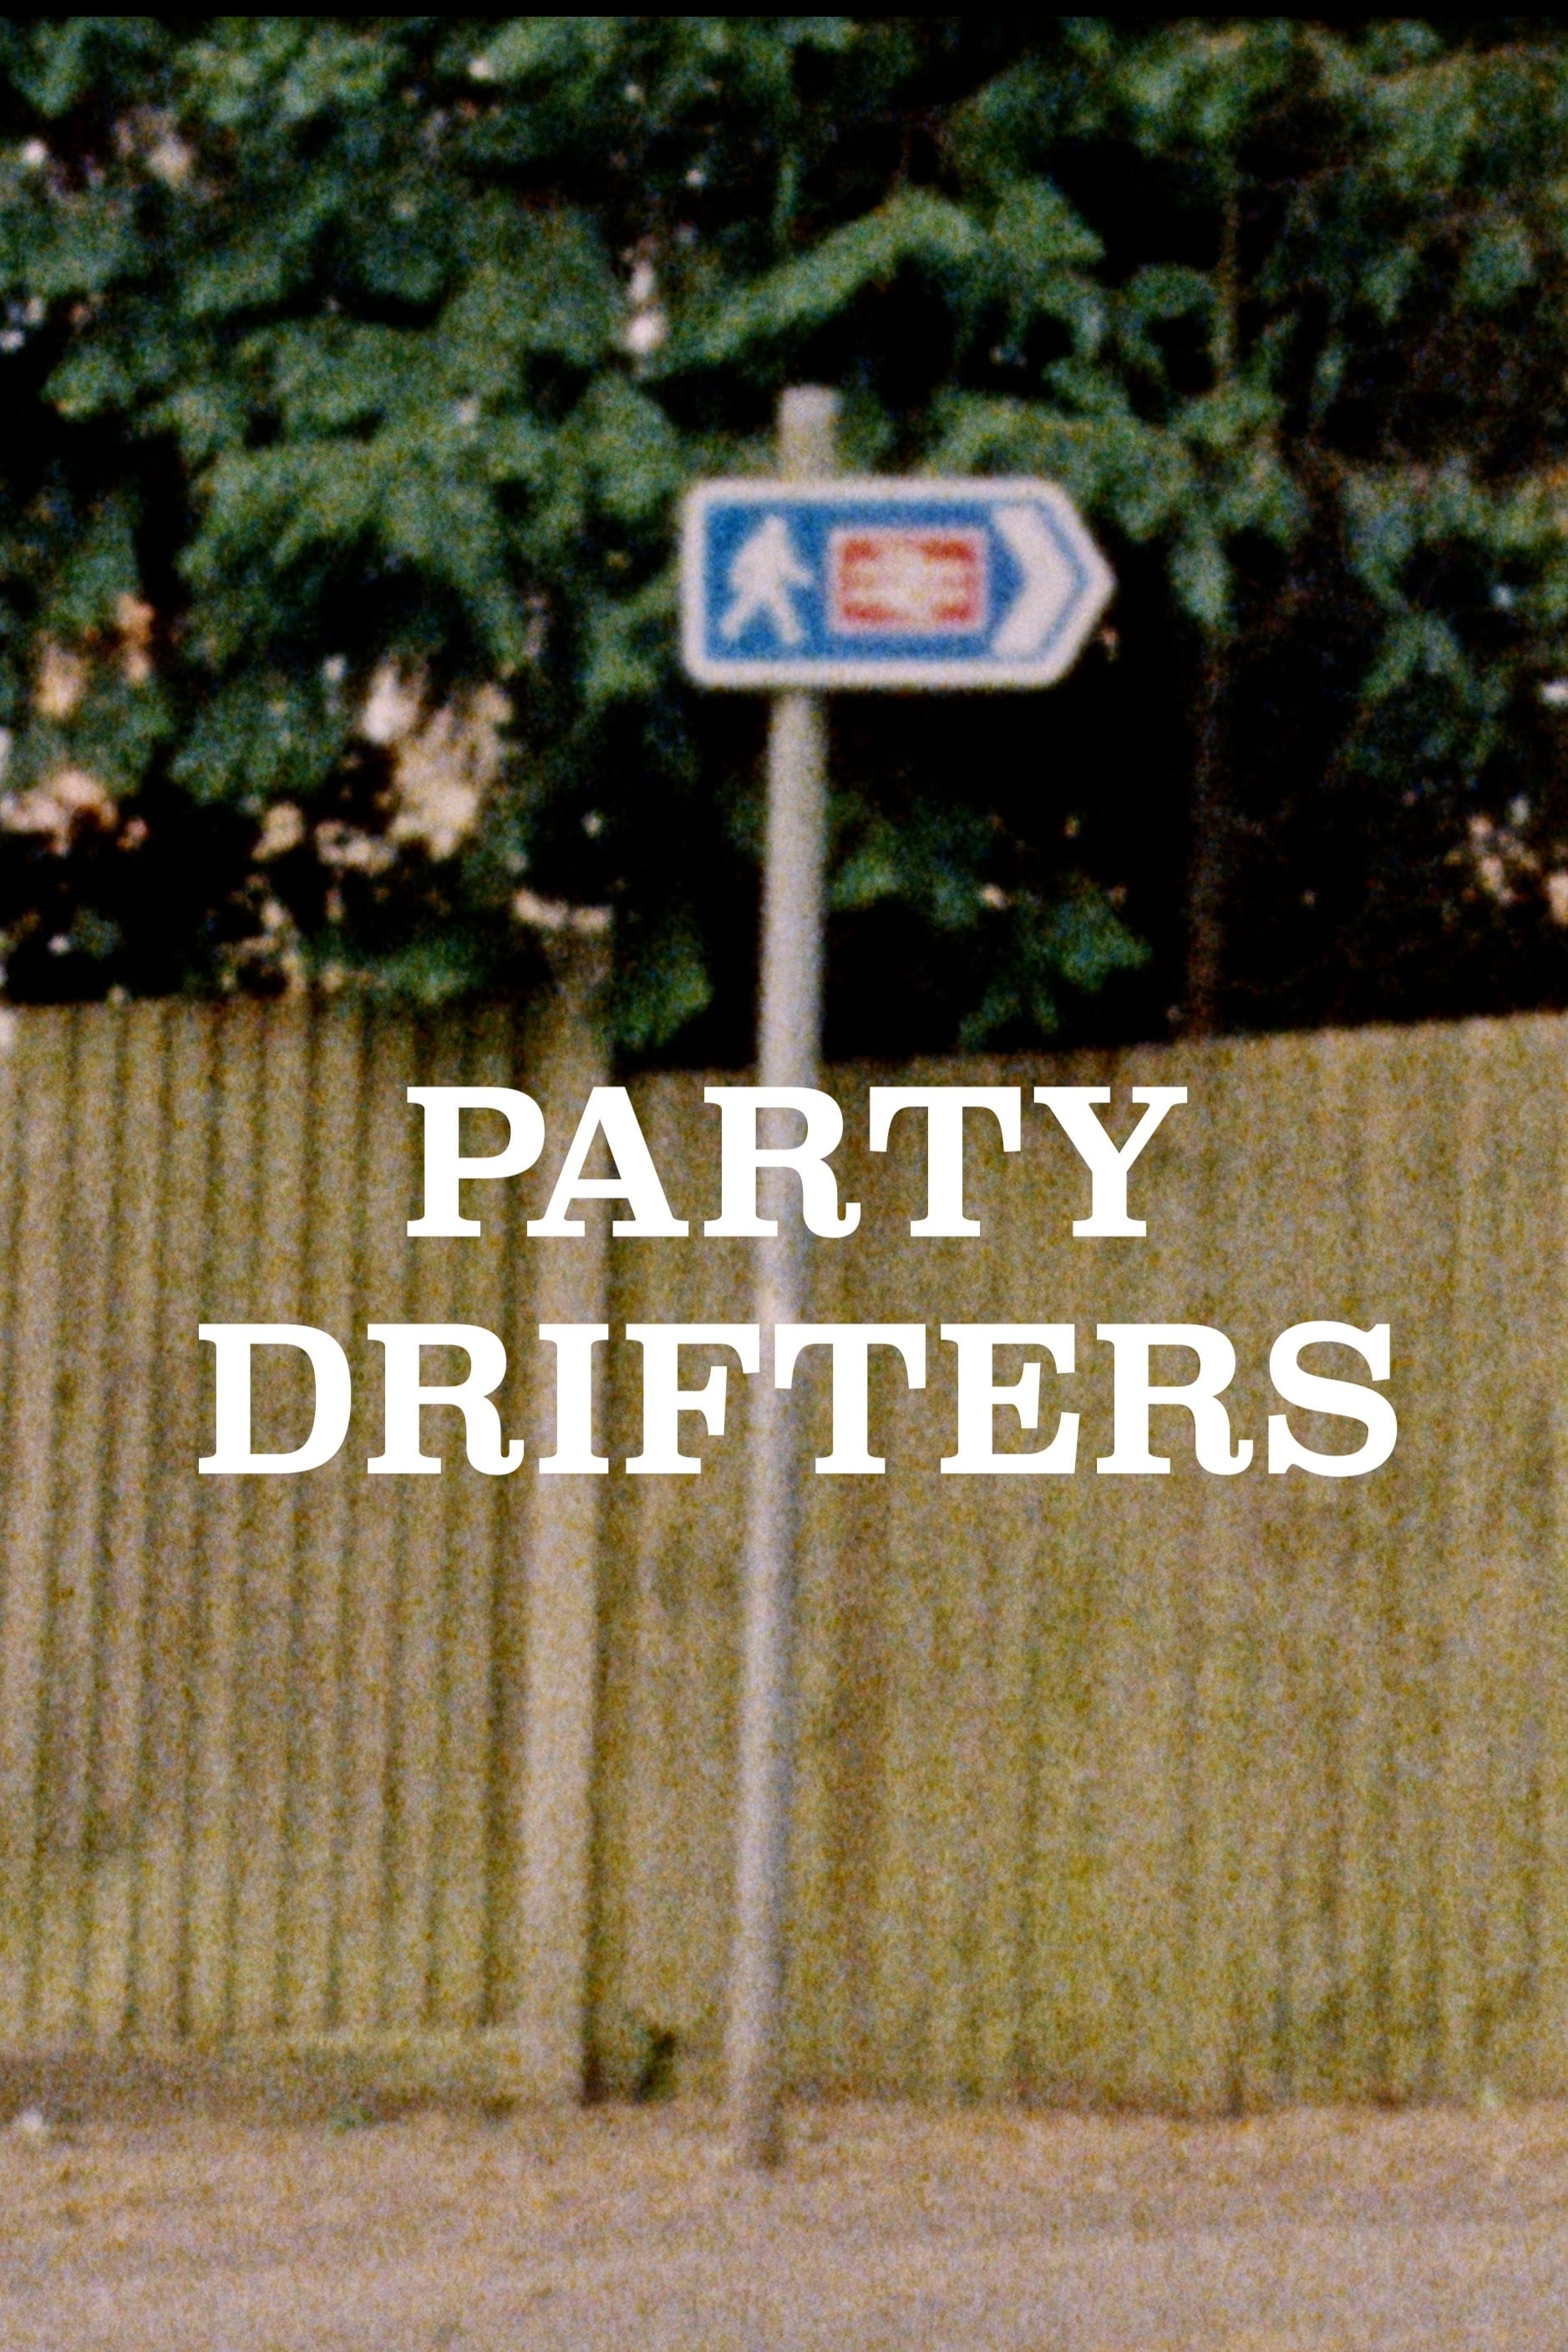 Party Drifters